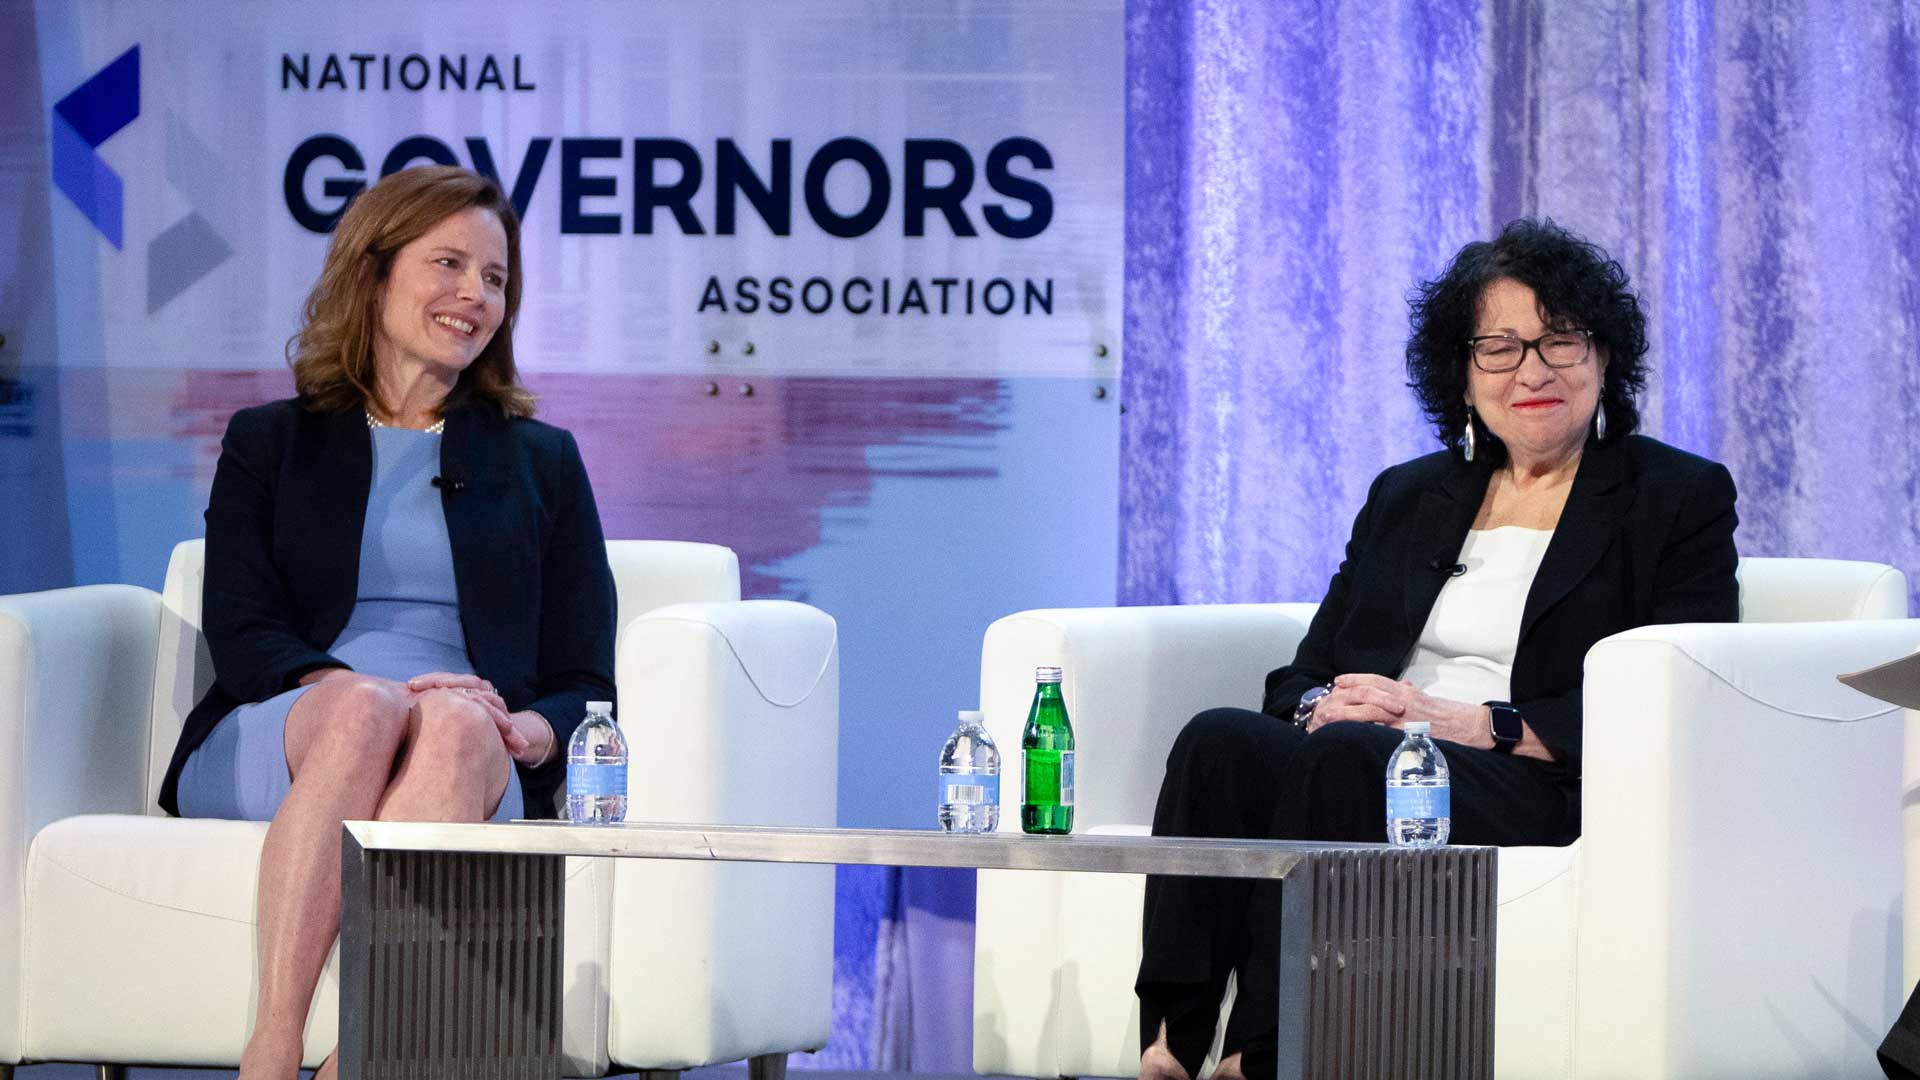 Supreme Court Justices Amy Coney Barrett, left, and Sonia Sotomayor speak with retired U.S. Appeals Court Judge Thomas Griffith, not shown, during a panel discussion at the winter meeting of the National Governors Association, Feb. 23, 2024 in Washington. In joint appearances less than three weeks apart, ideologically opposite Justices Amy Coney Barrett and Sonia Sotomayor said a Supreme Court where voices don’t get raised in anger can be a model for the rest of the country in these polarized times. 